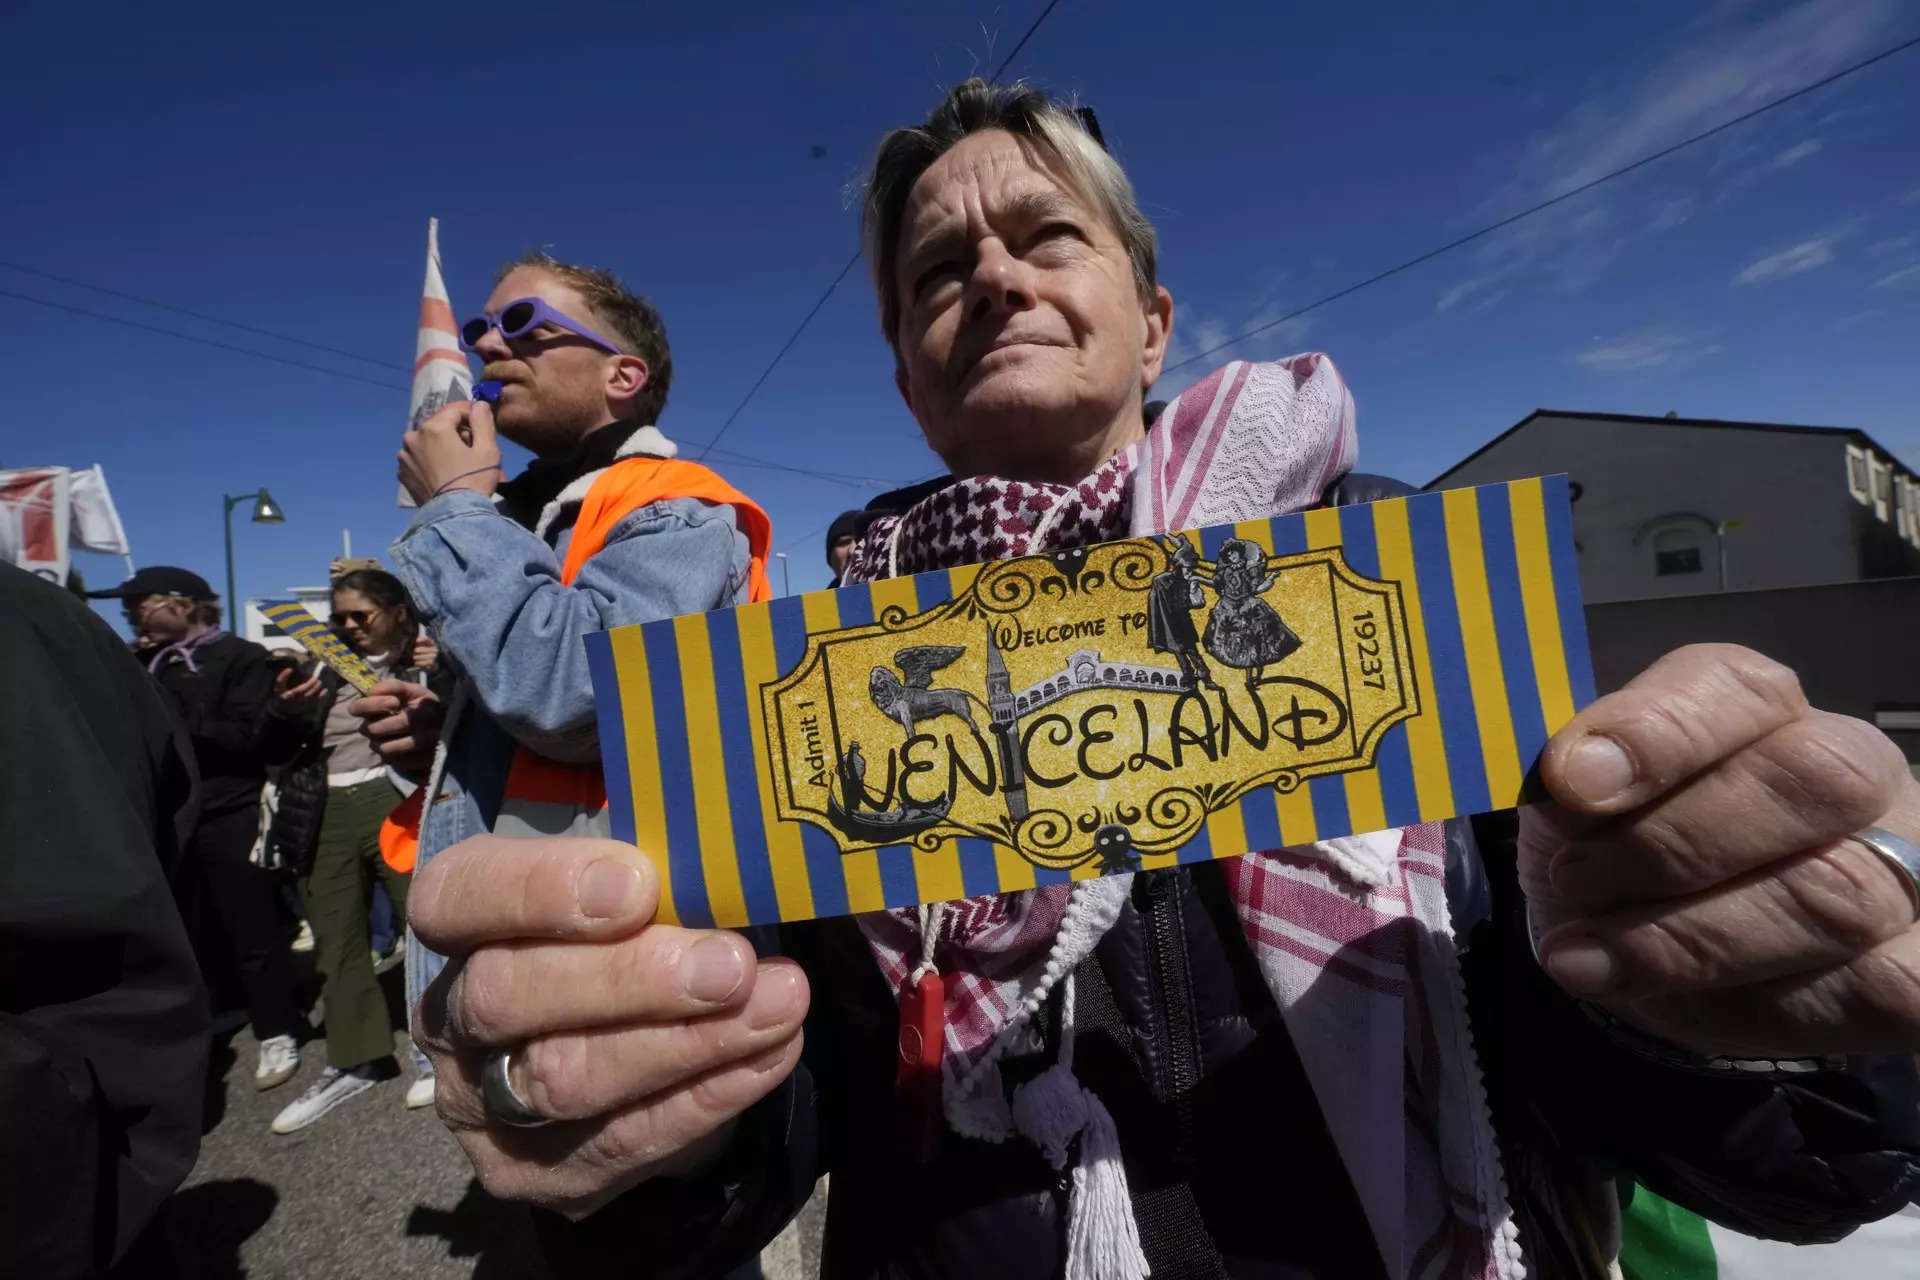 <p>A citizen shows a ticket with the writing 'Veniceland' during a protest against Venice Tax Fee in Venice, Italy, Thursday, April 25, 2024. The fragile lagoon city of Venice begins a pilot program Thursday to charge daytrippers a 5 euro entry fee that authorities hope will discourage tourists from arriving on peak days. The daytripper tax is being tested on 29 days through July, mostly weekends and holidays starting with Italy's Liberation Day holiday Thursday. Officials expect some 10,000 people will pay the fee to access the city on the first day, downloading a QR code to prove their payment, while another 70,000 will receive exceptions, for example, because they work in Venice or live in the Veneto region. (AP Photo/Luca Bruno)</p>